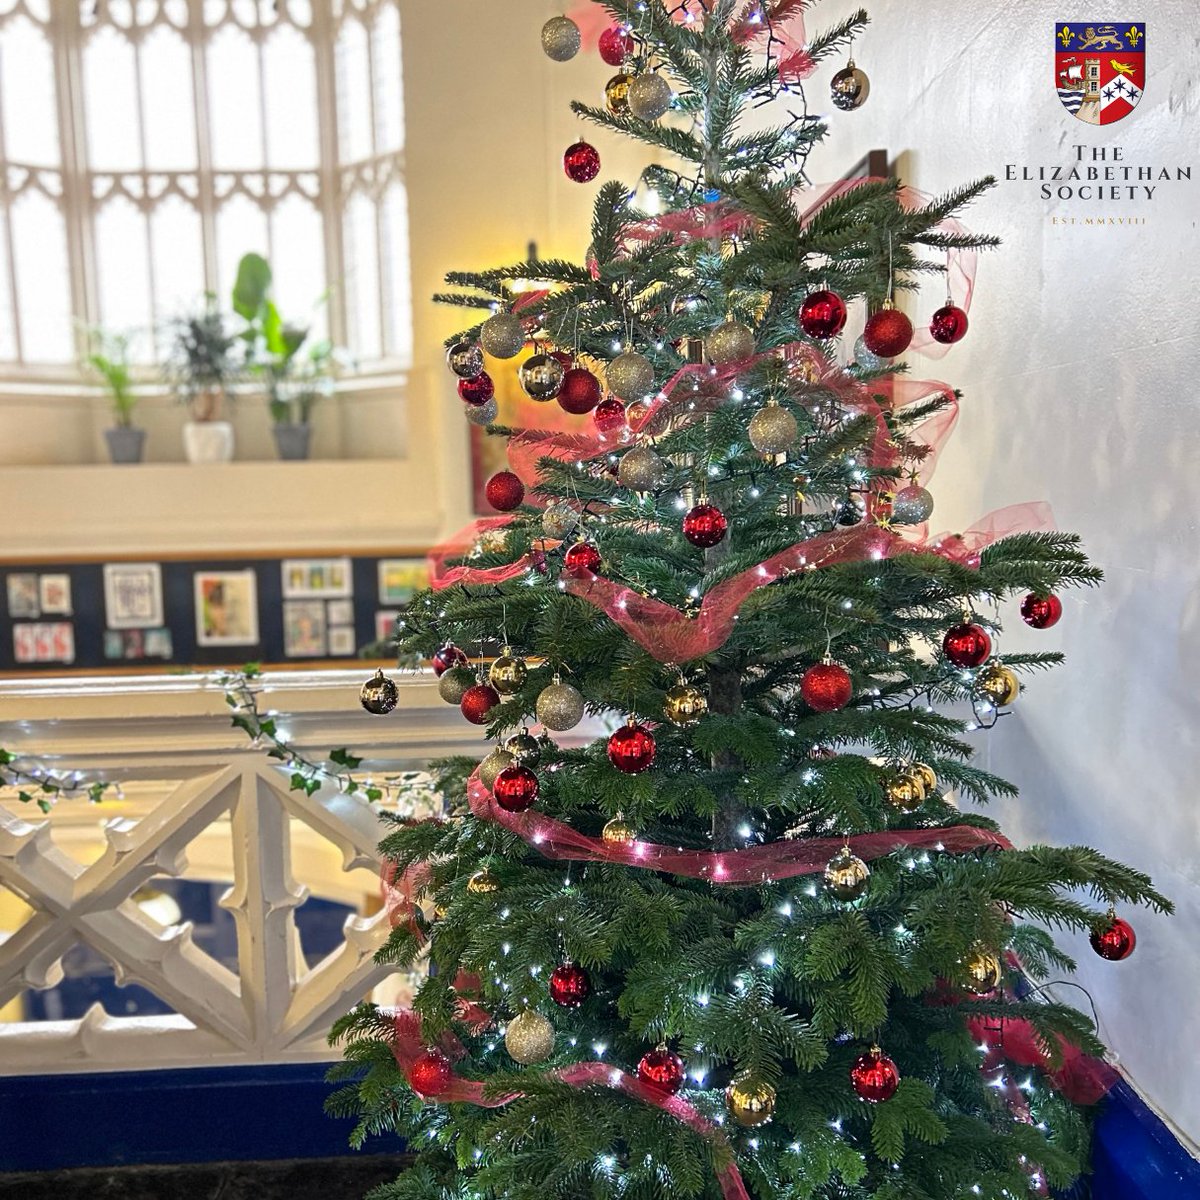 From all of us at QEH, we wish you a very Merry Christmas and a Happy New Year!

#chirstmas #christmastree #qeh #qehcommunity #alumni #oldelizabethans 
@QEHSchool @QEHSchoolHead